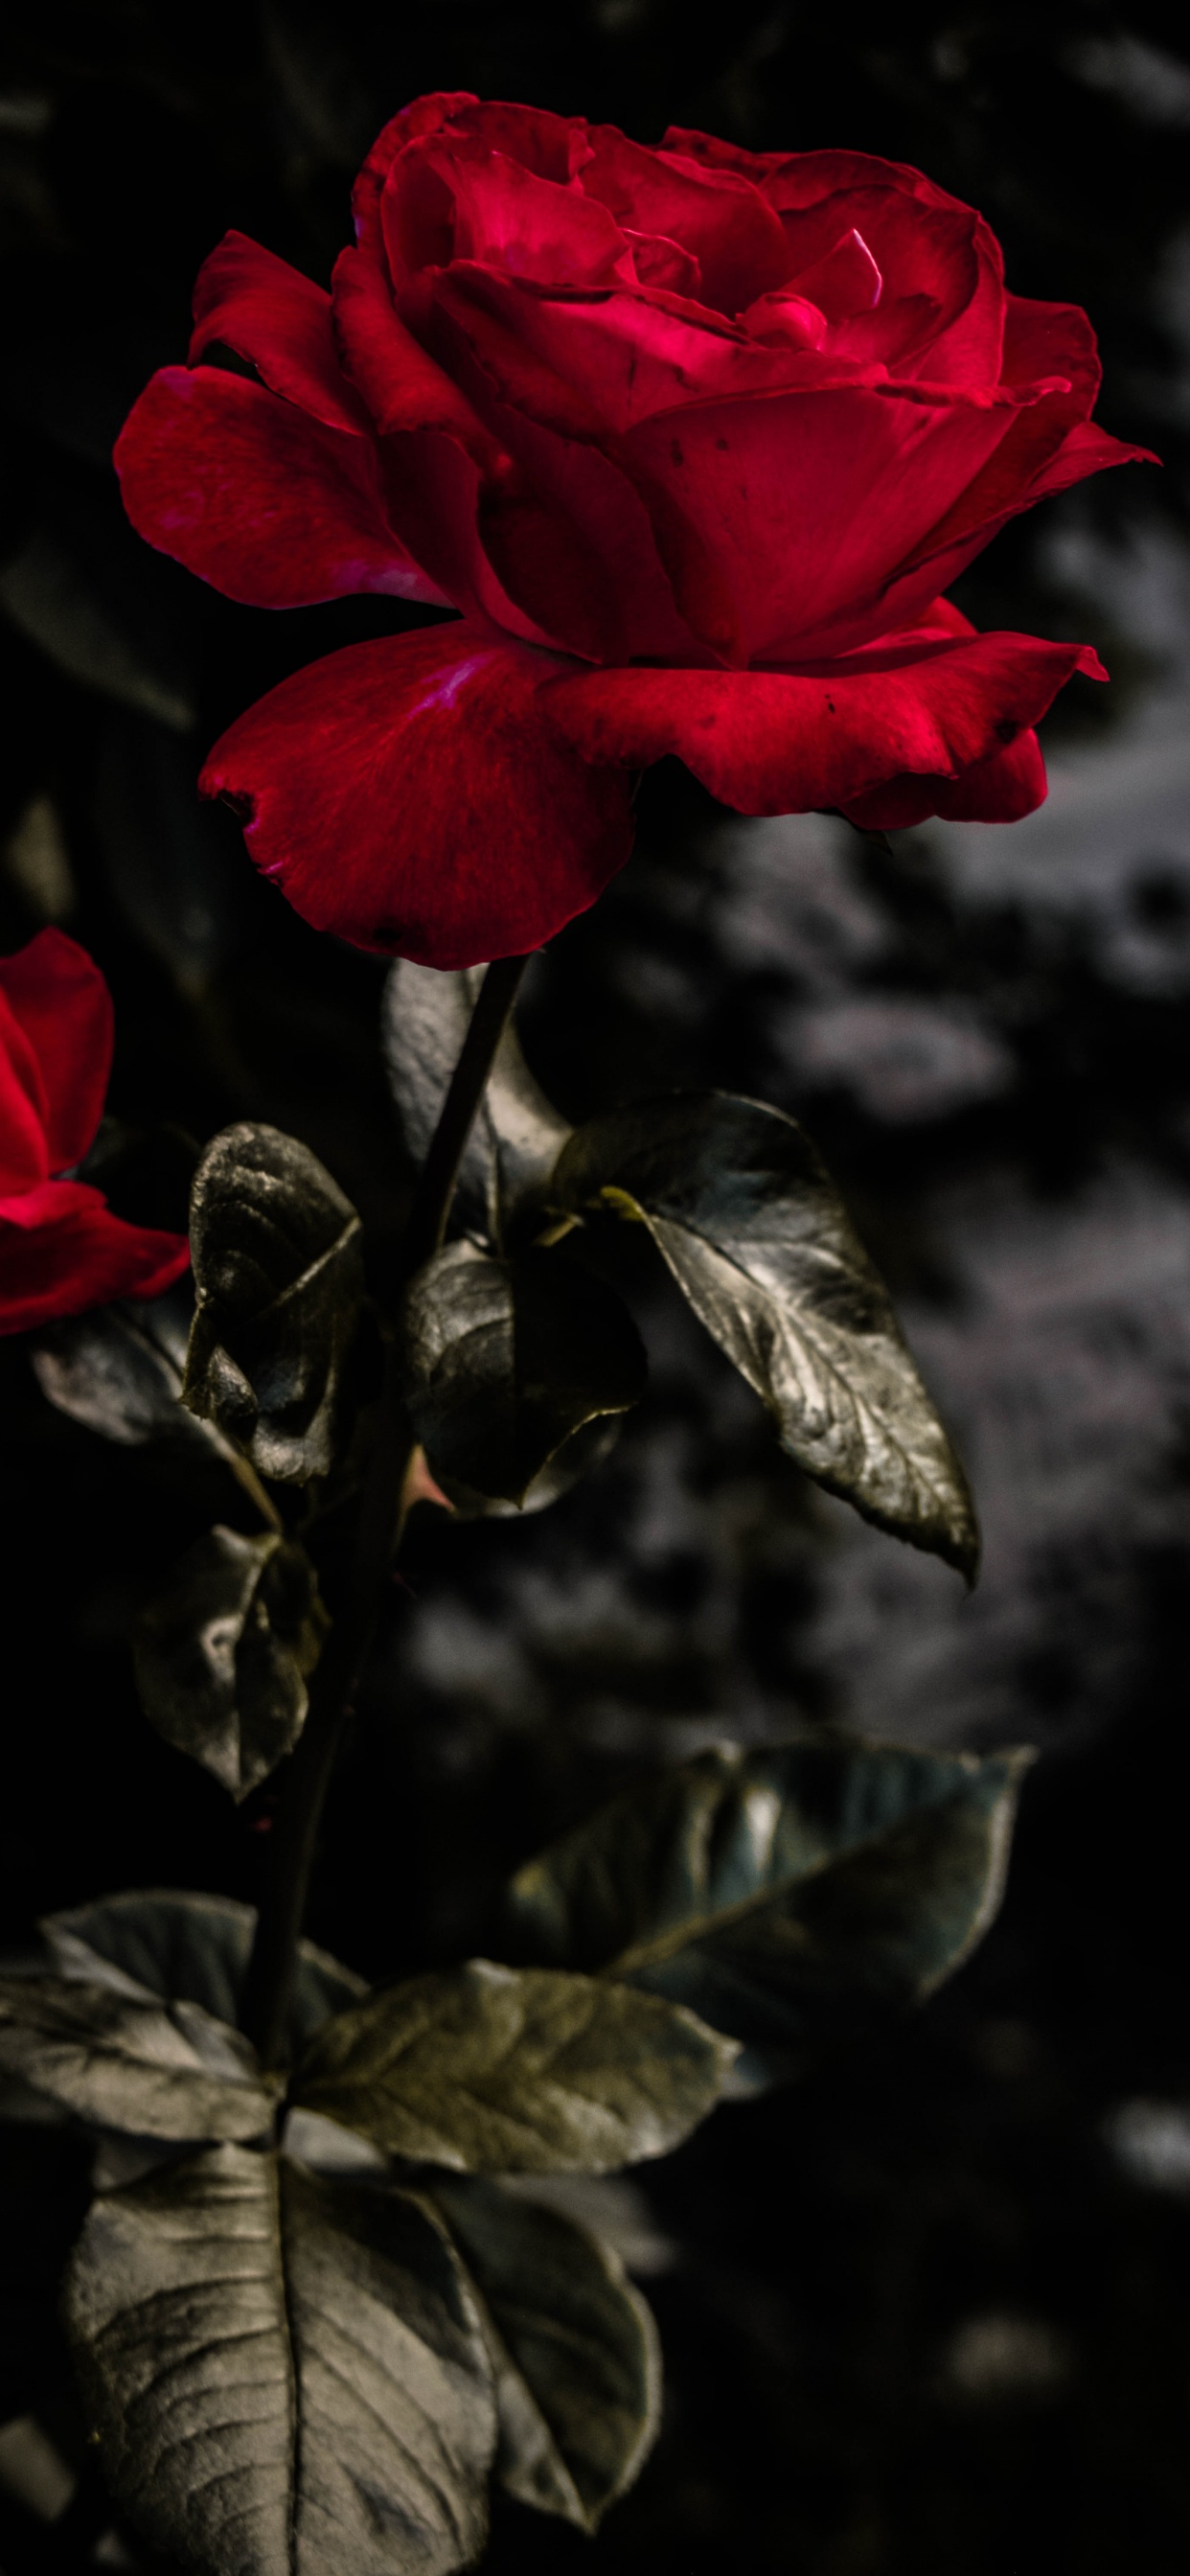 Red Rose in Bloom During Daytime. Wallpaper in 1242x2688 Resolution